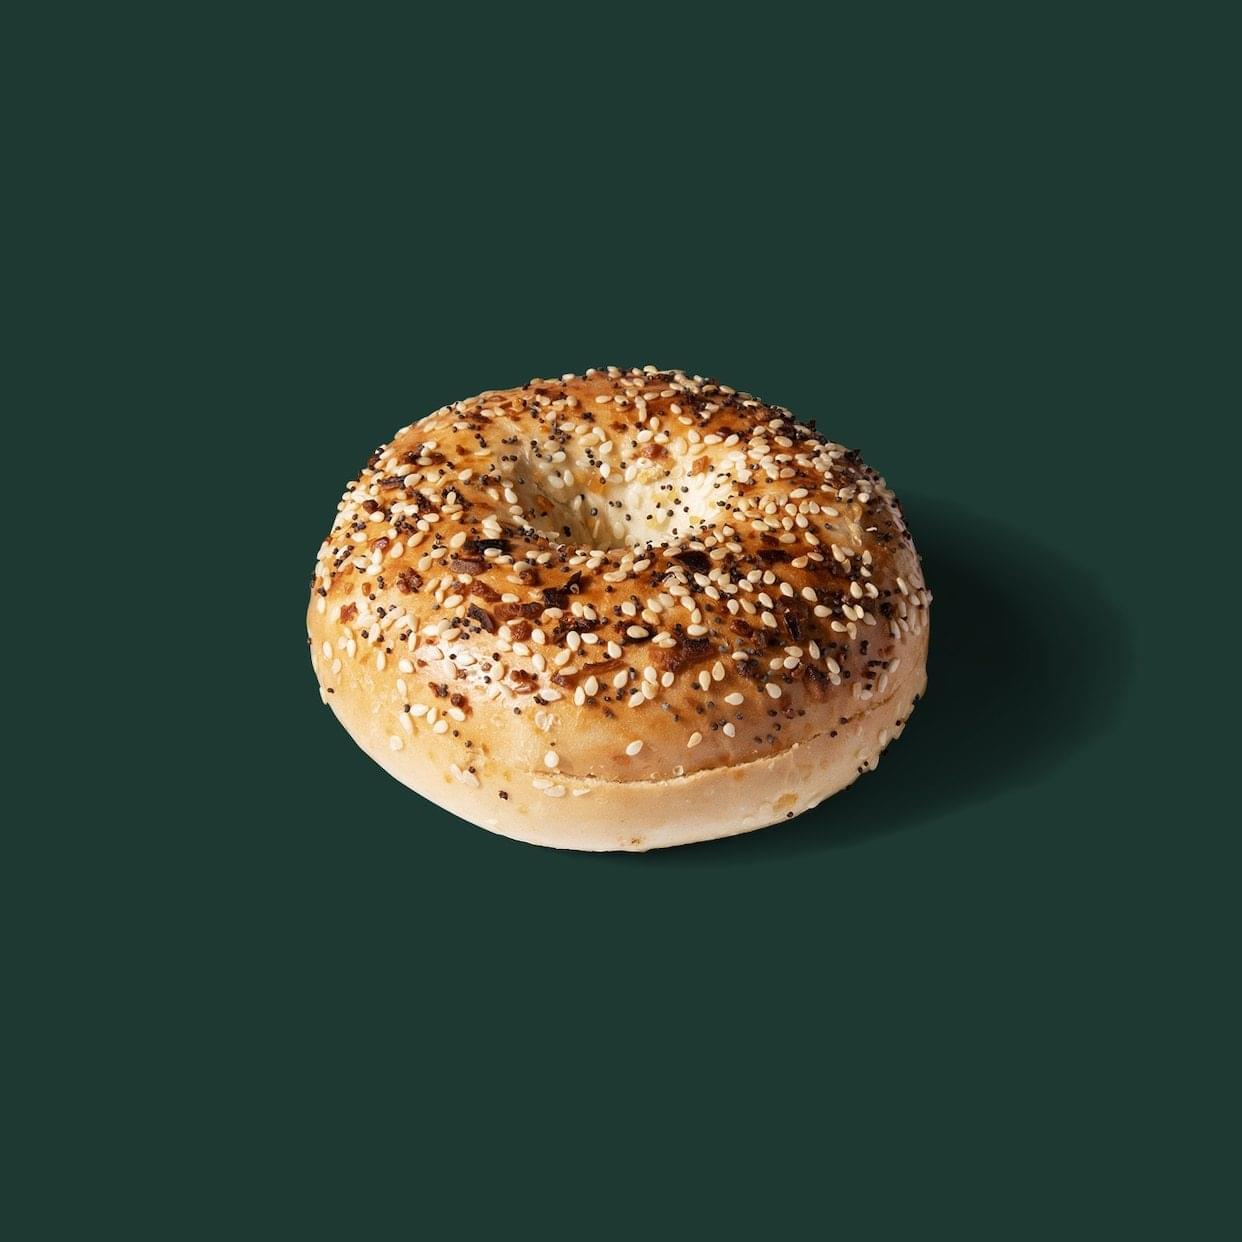 Starbucks Everything Bagel Nutrition Facts